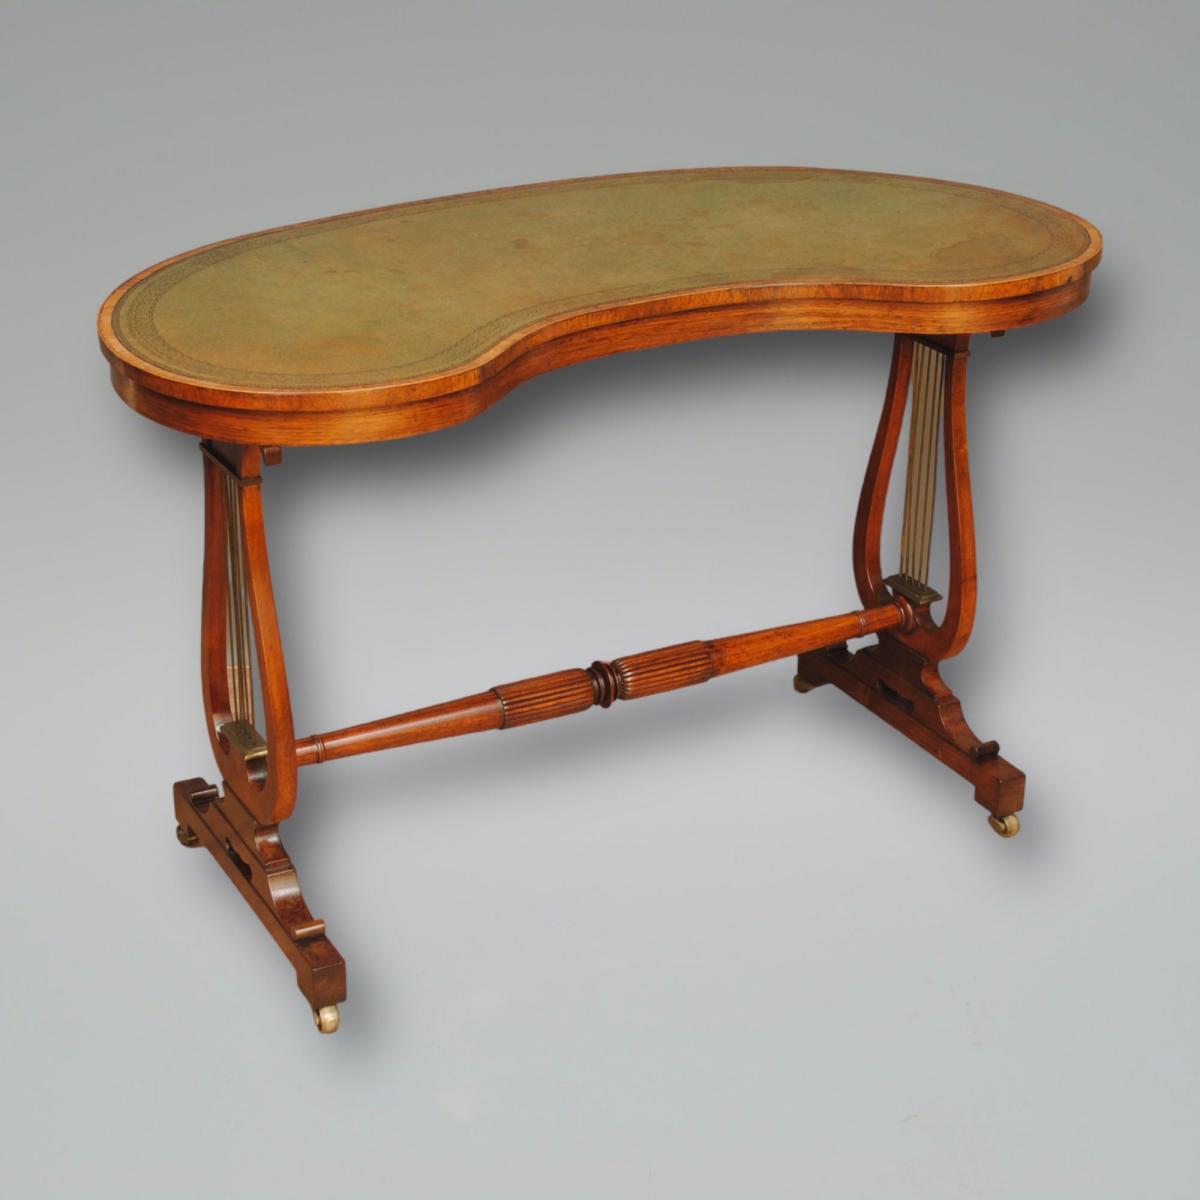 A Regency Rosewood Kidney Shaped Writing Table